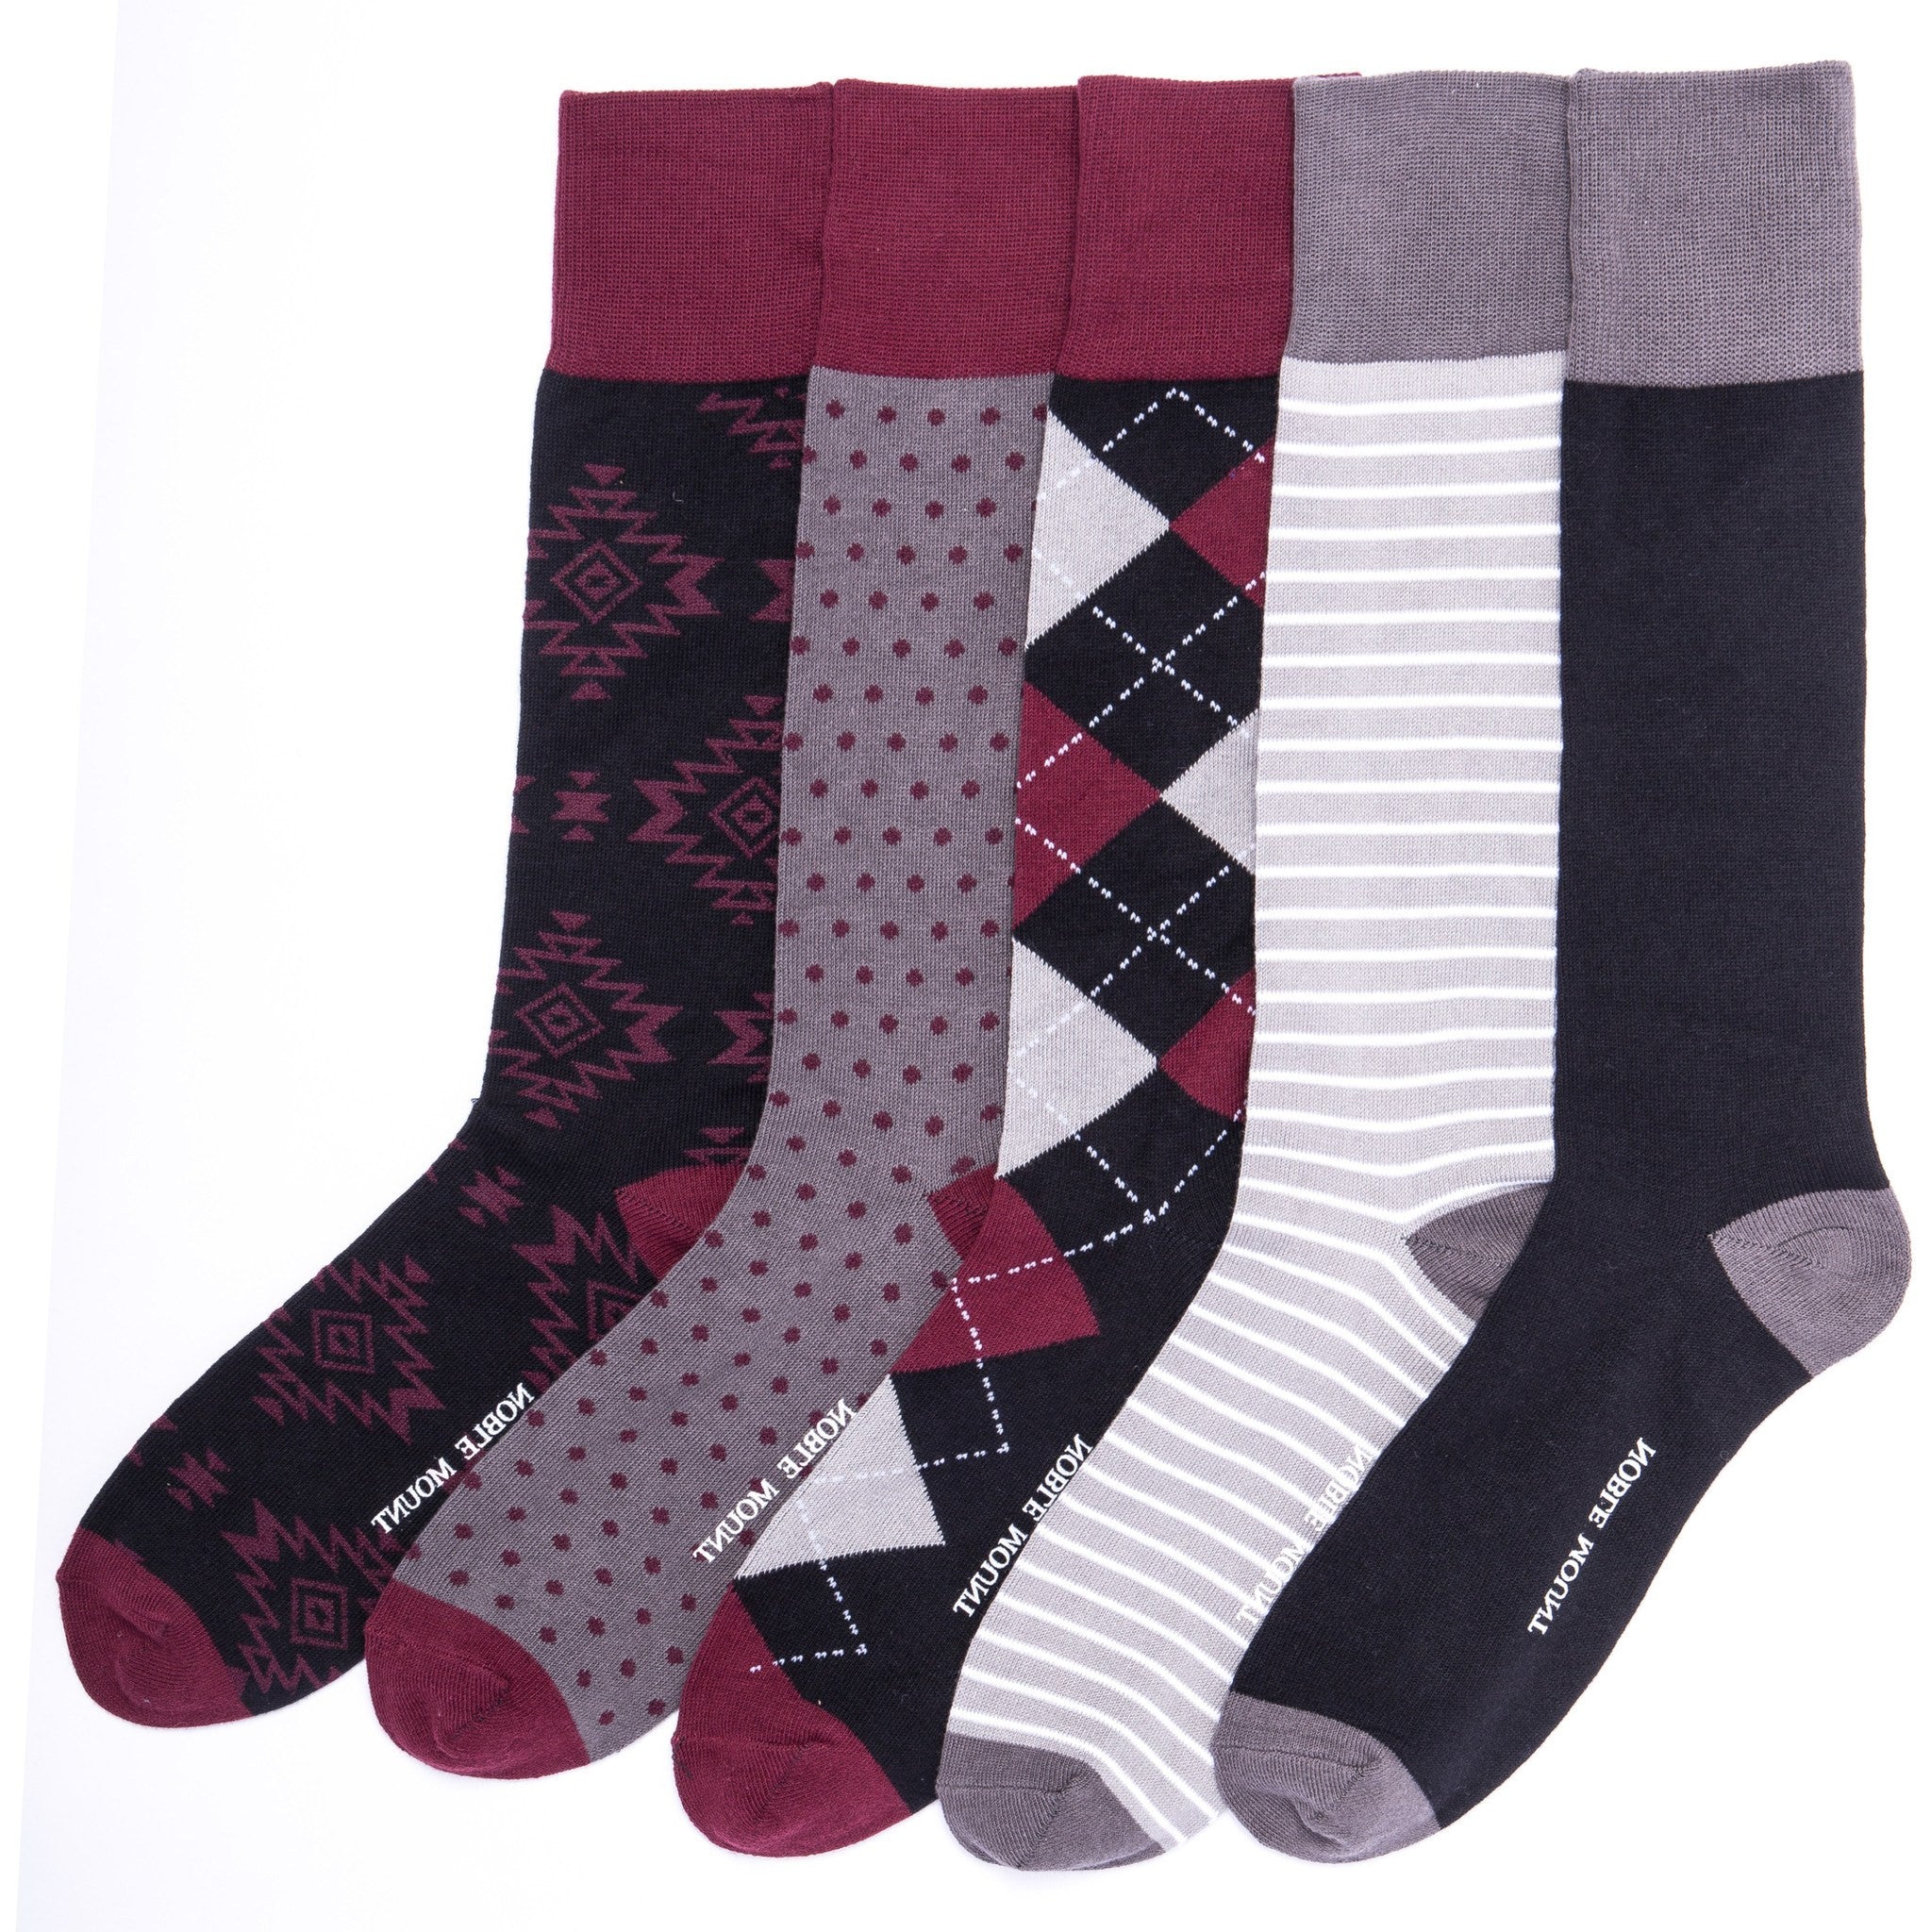 Men's Combed Cotton Weekday Dress Socks 5-Pack